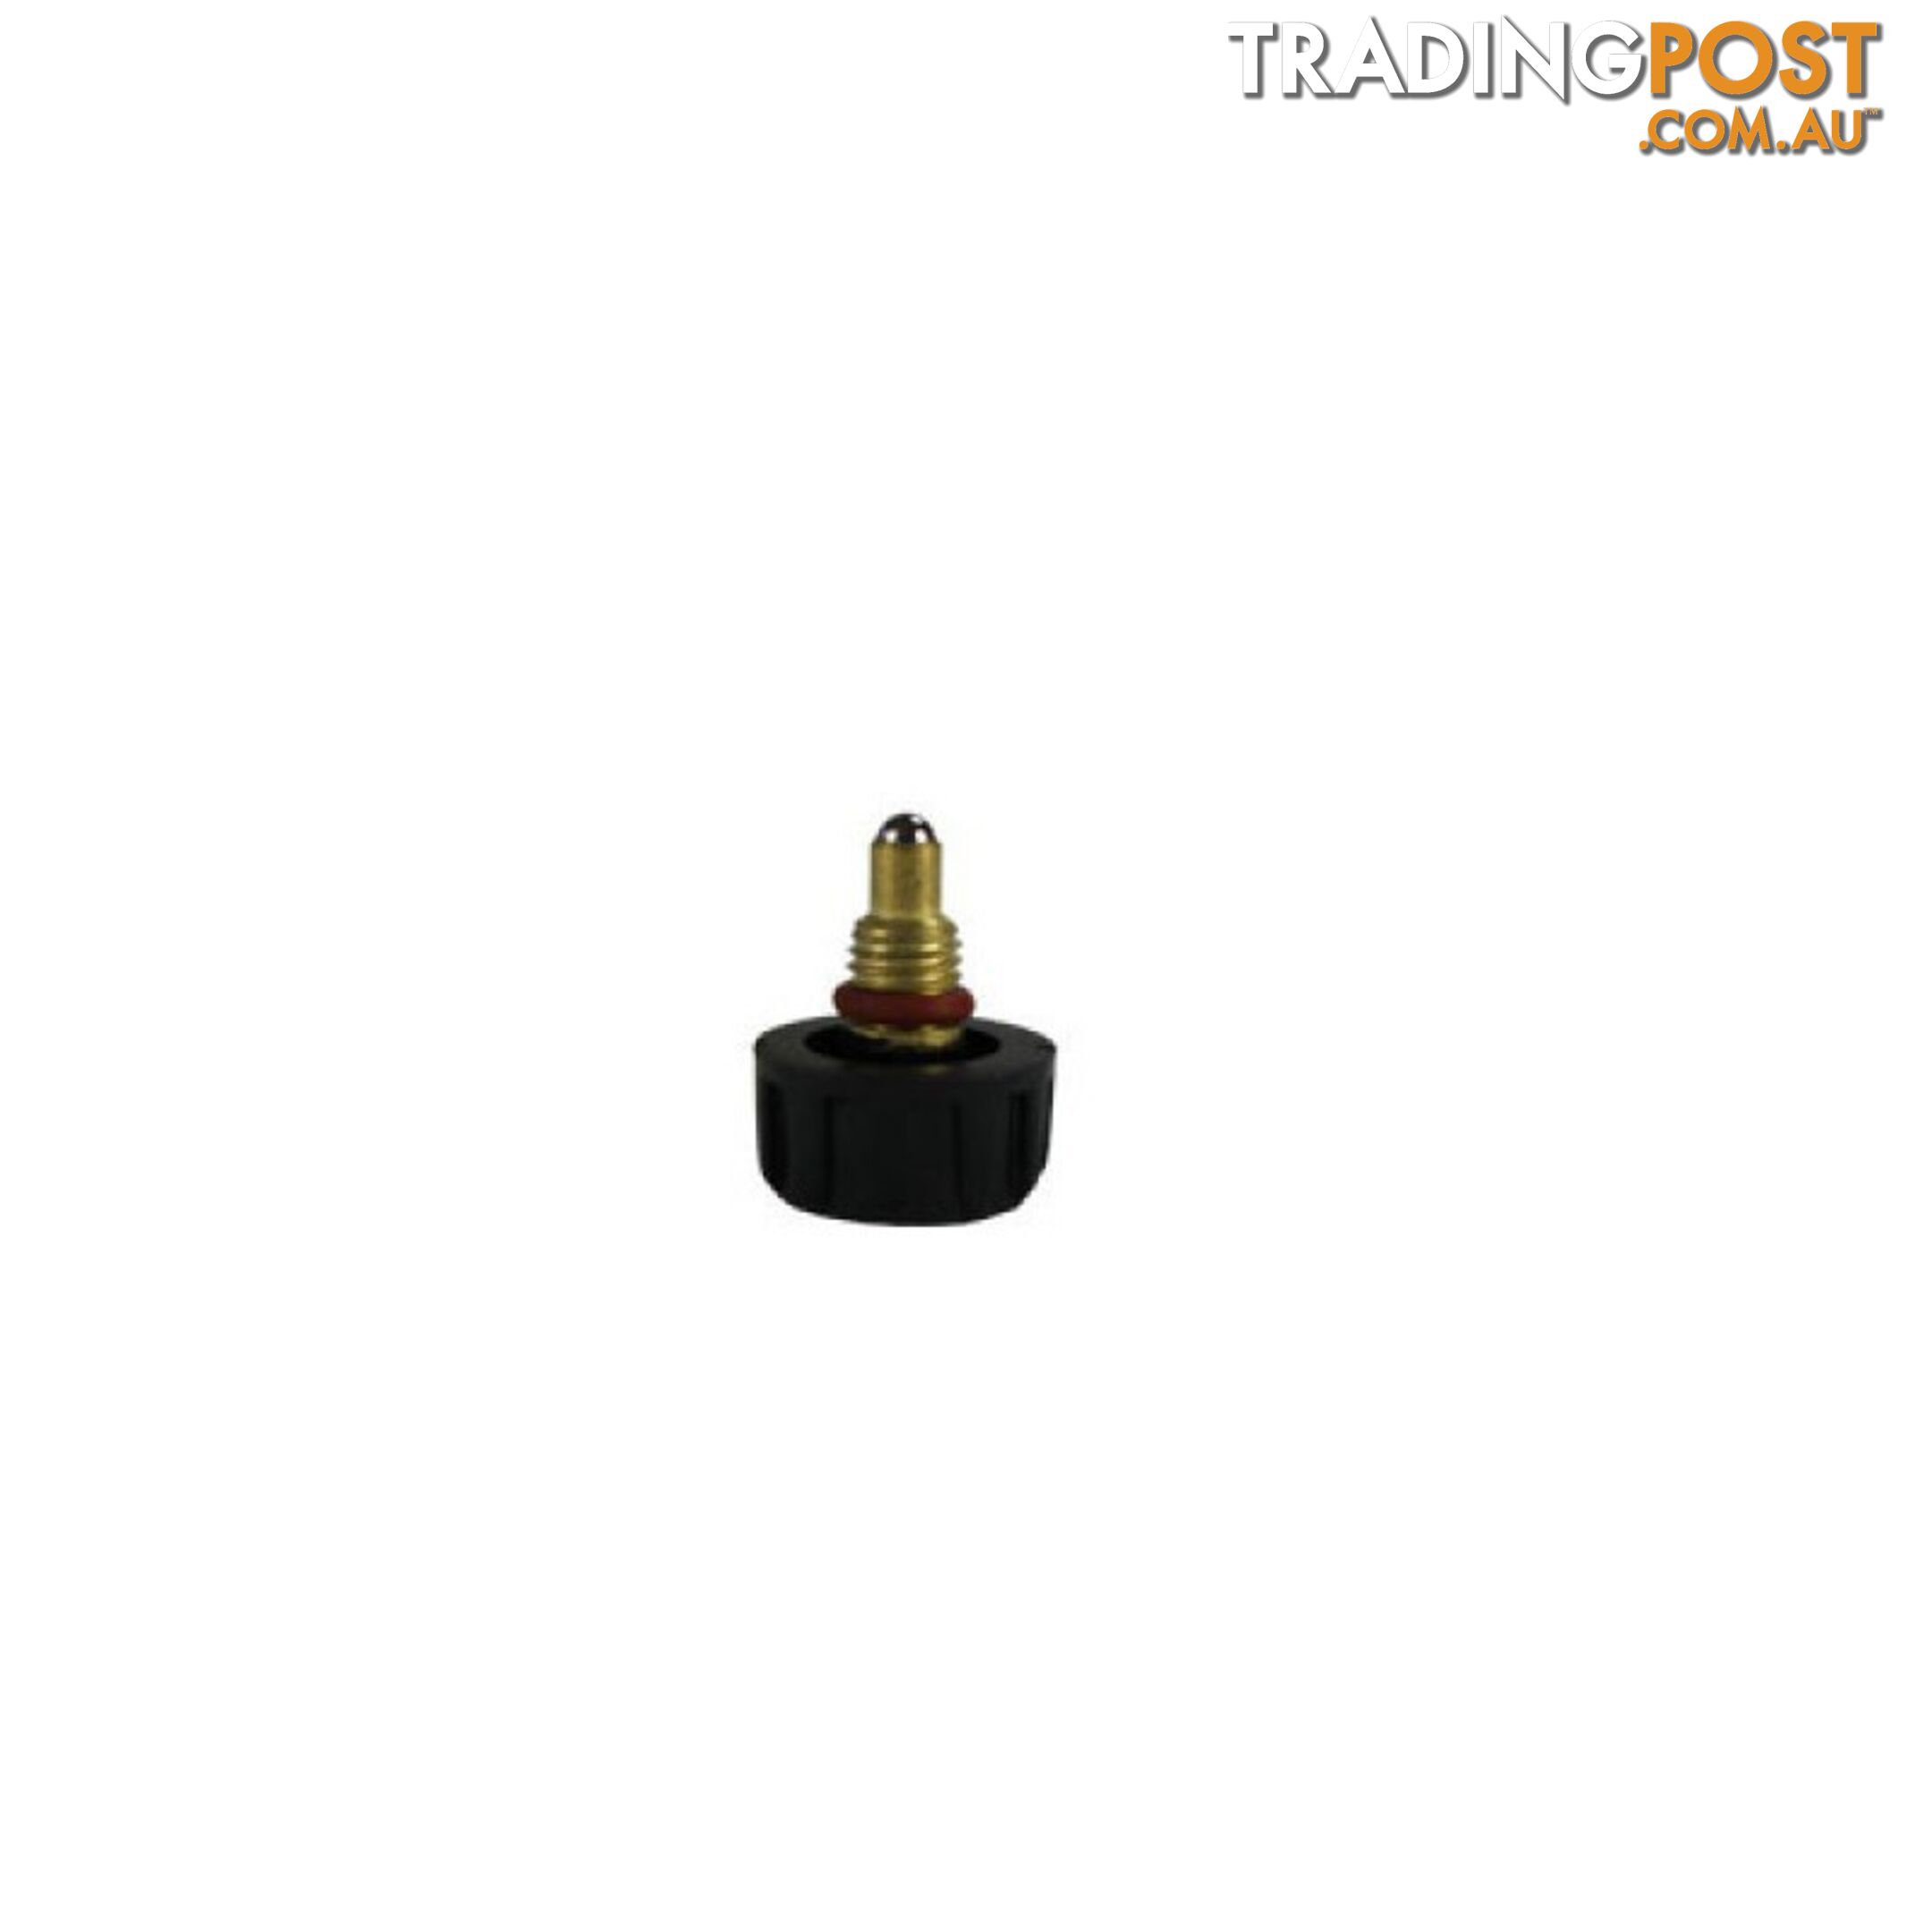 Valve for Torch Head (Suits 26)